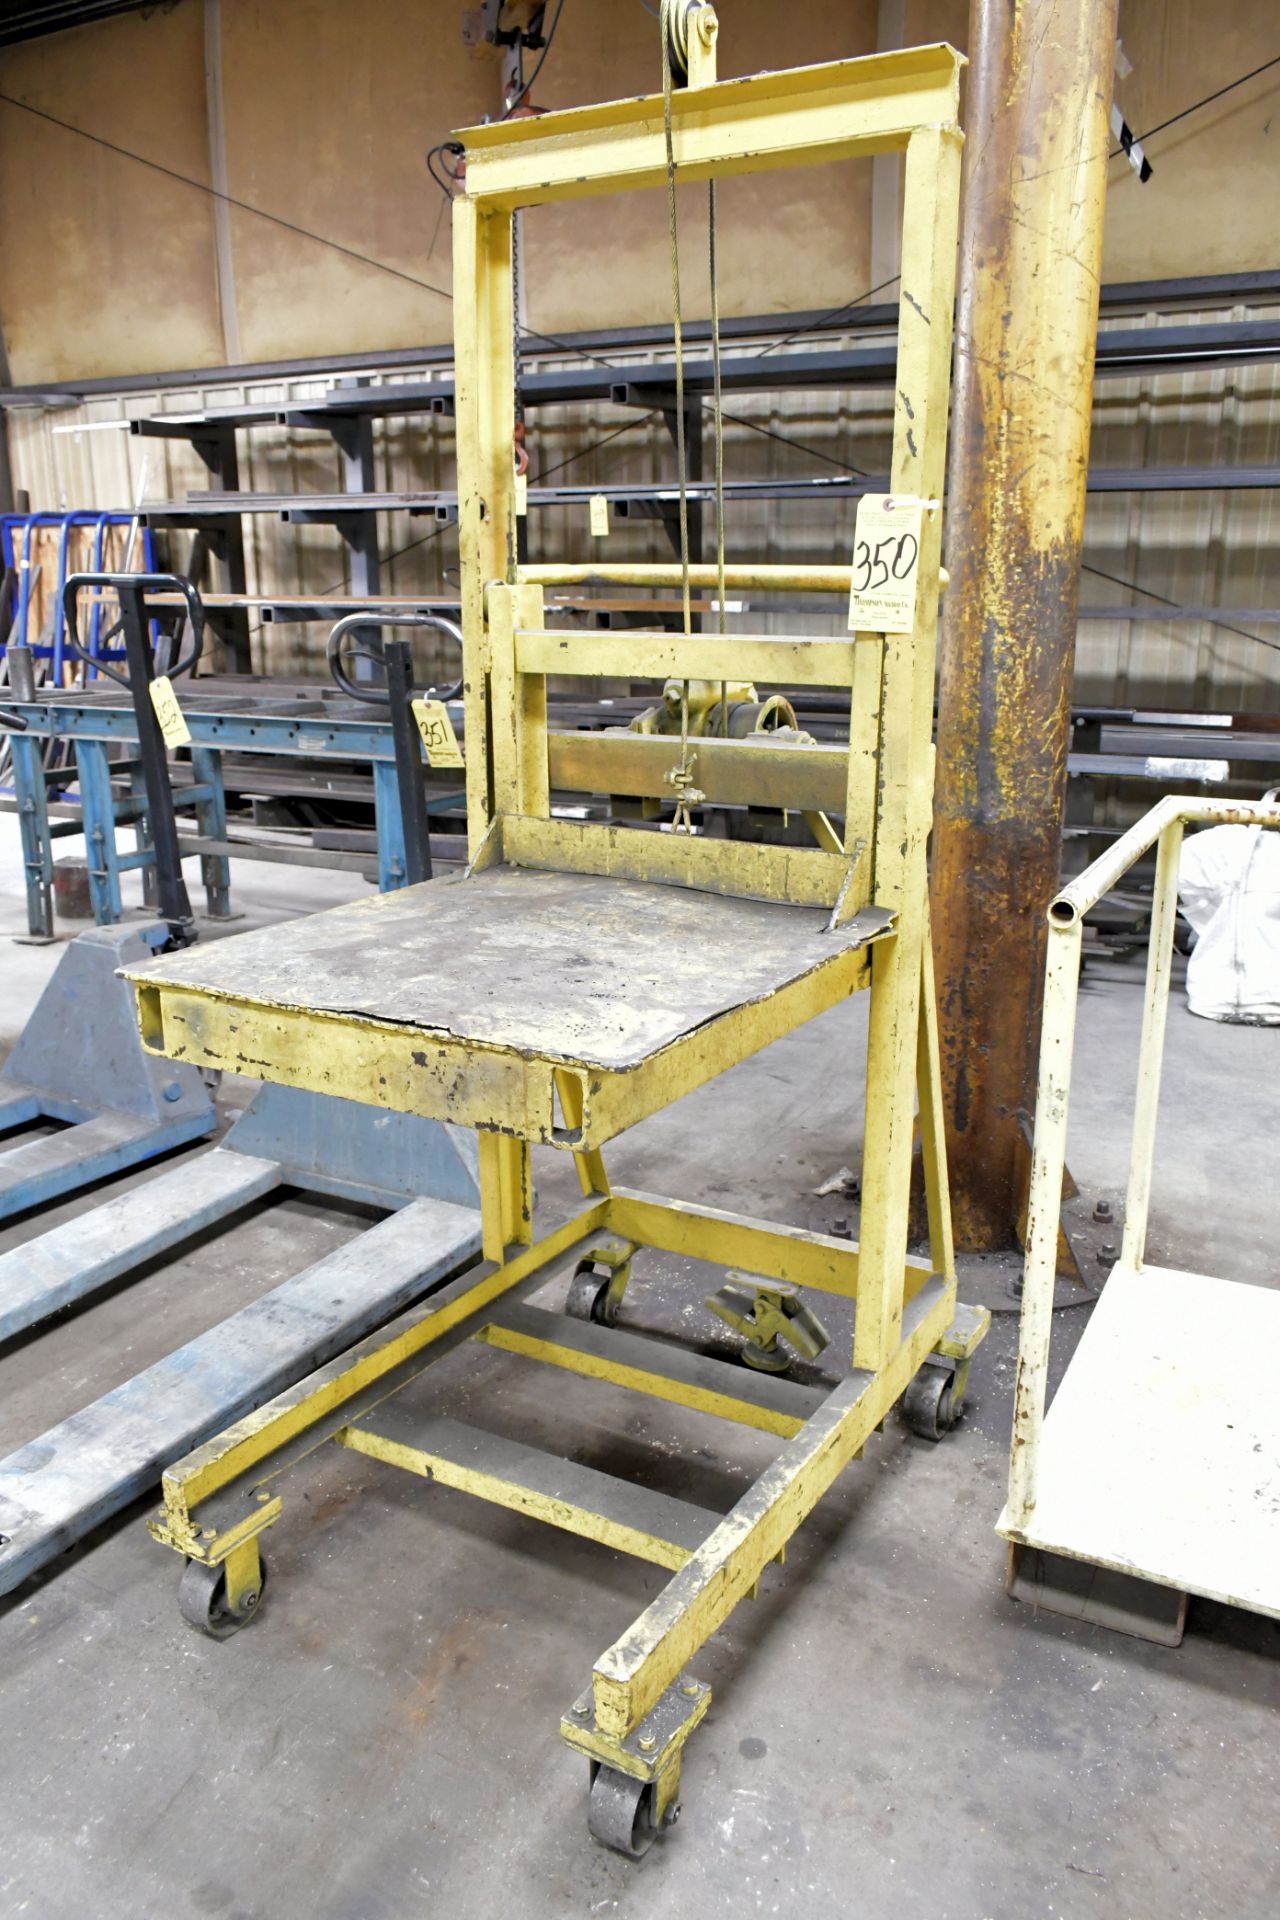 No Identifying Name Approx. 750-Lbs. Capacity Lift Cart